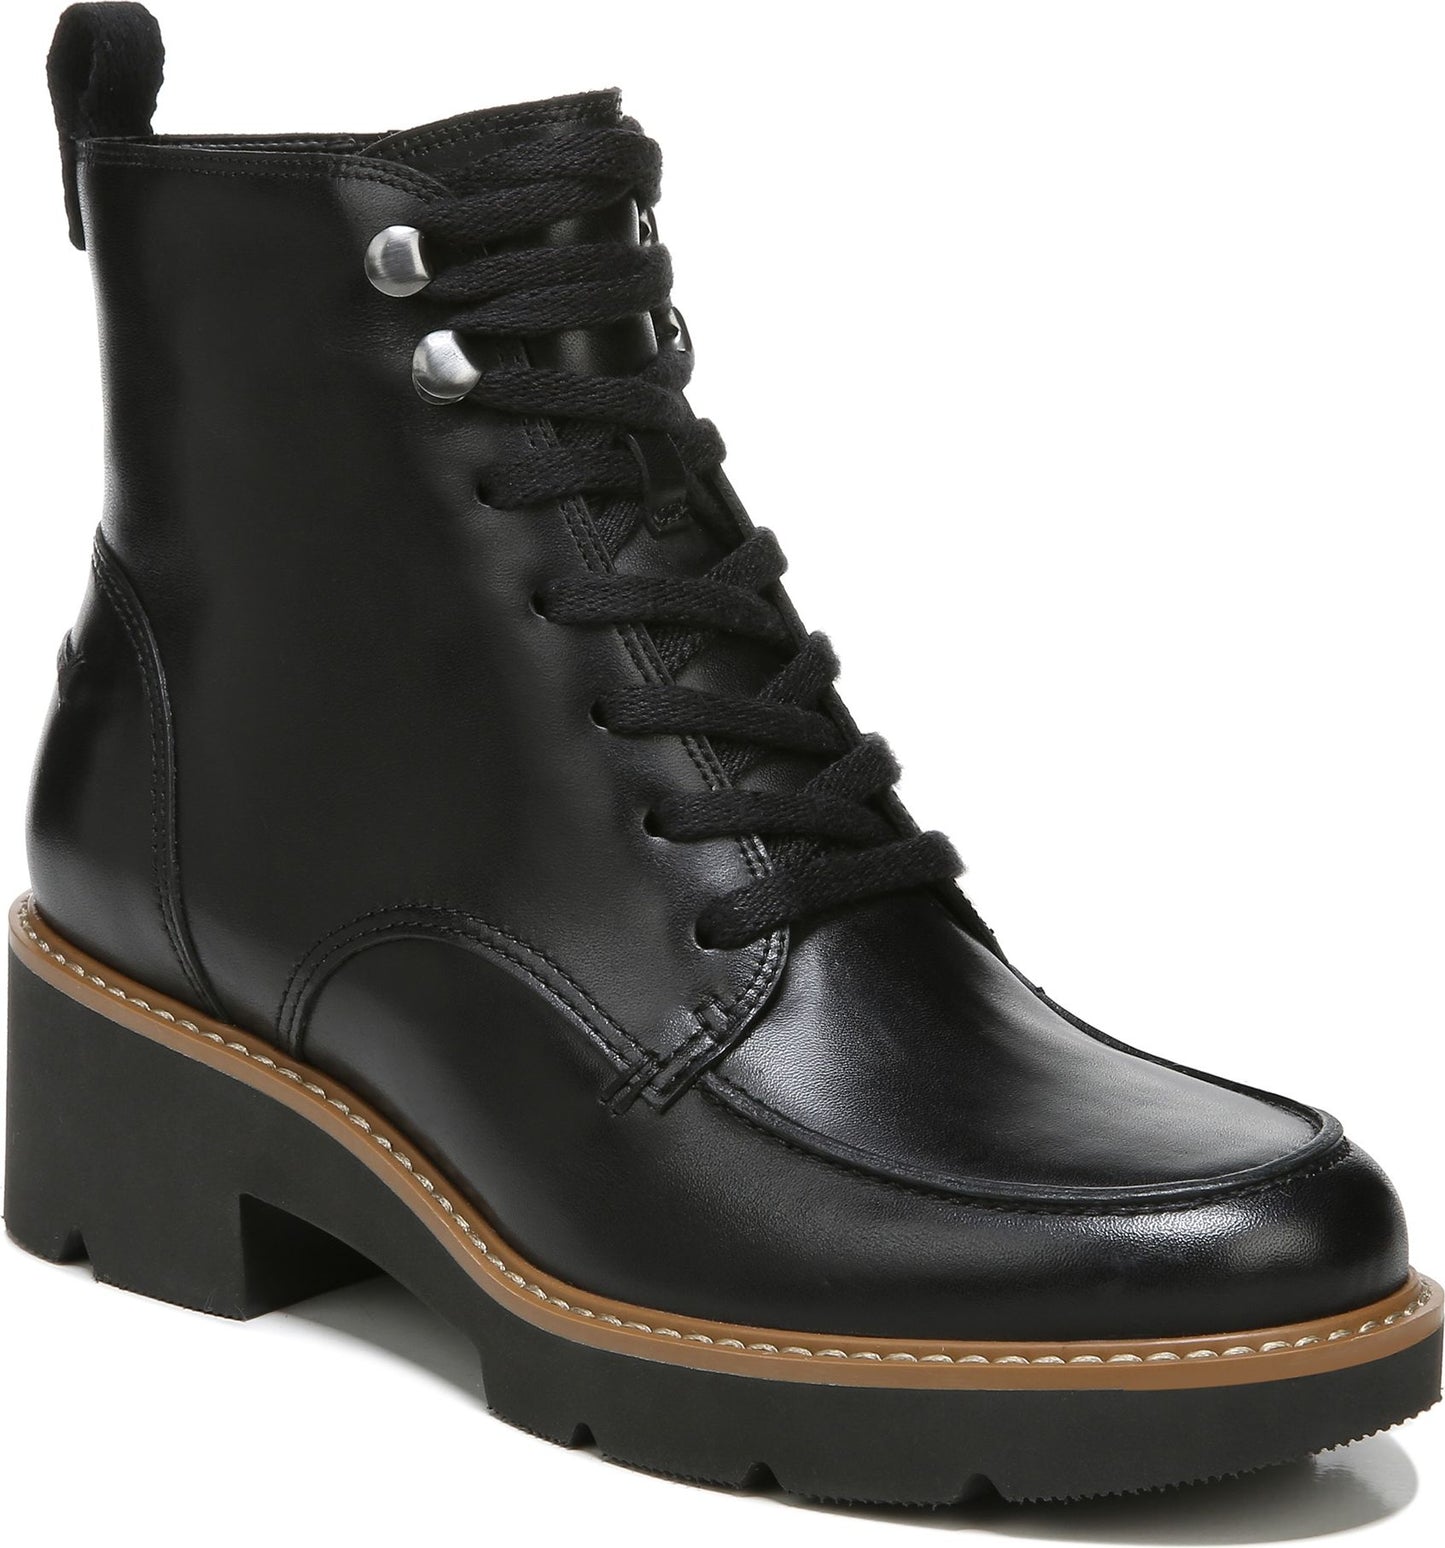 Naturalizer Boots Dara Black Leather - Wide